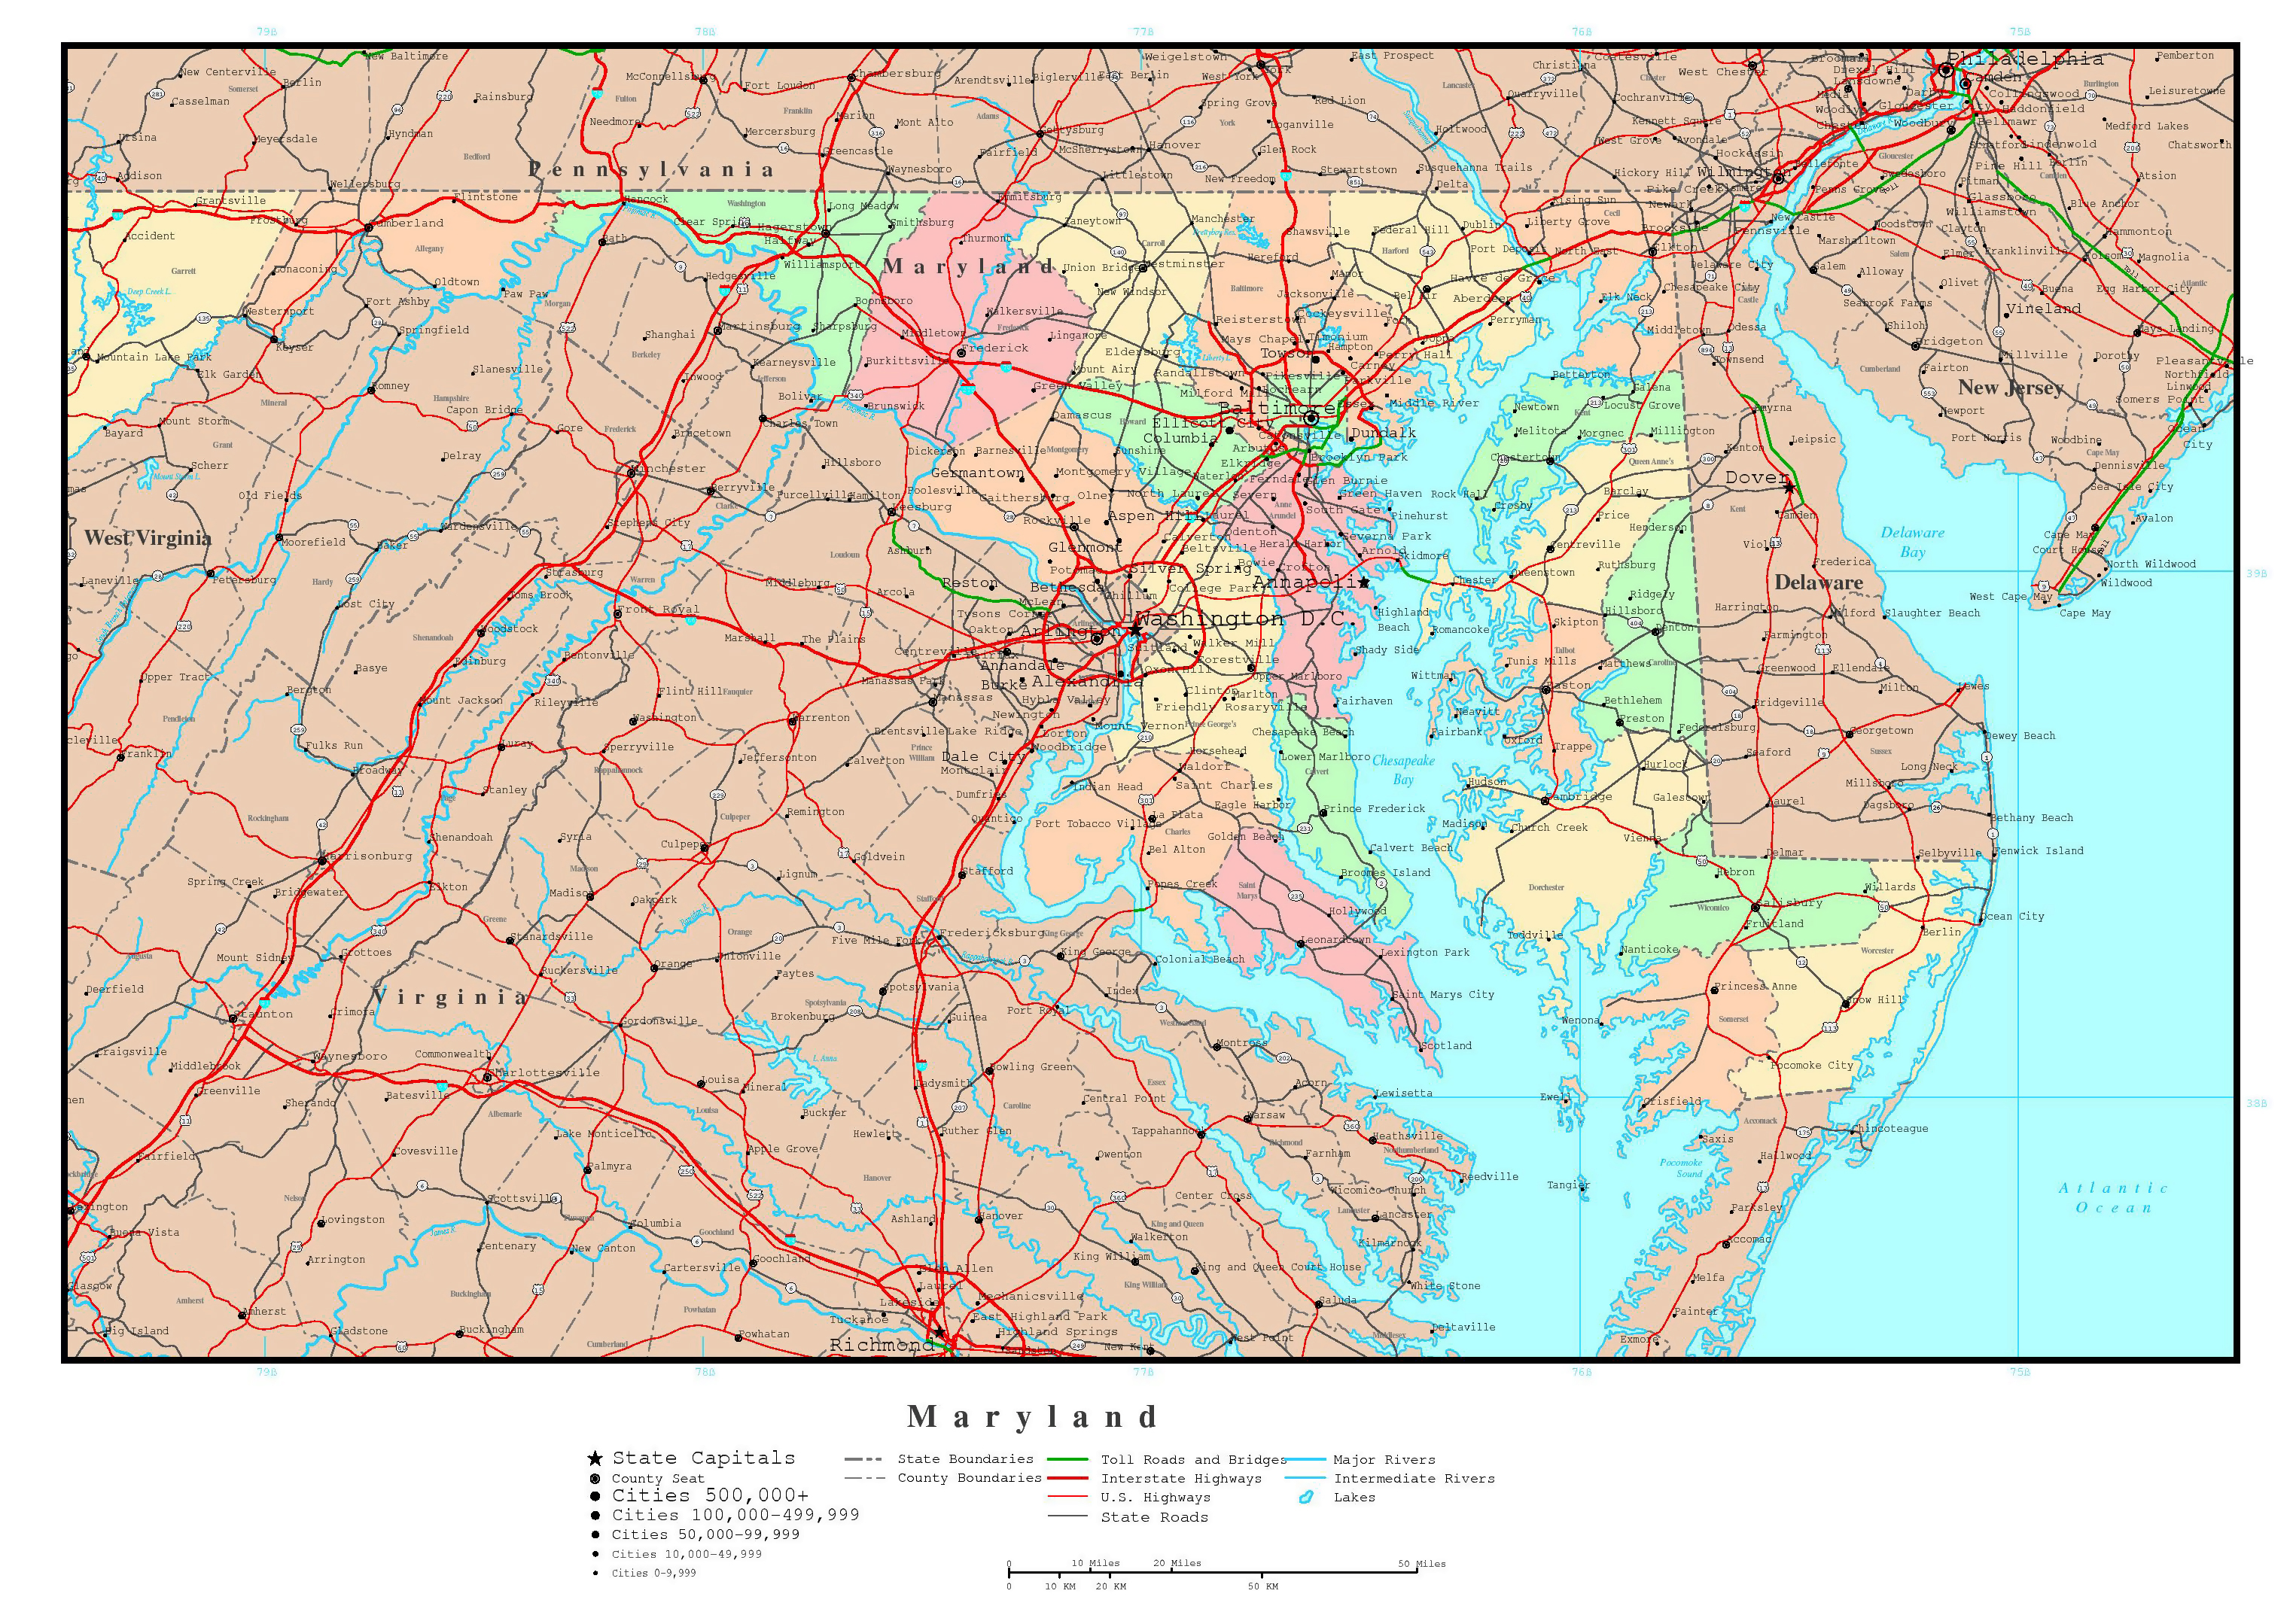 Large Detailed Administrative Map Of Maryland State With Roads Highways And Major Cities 